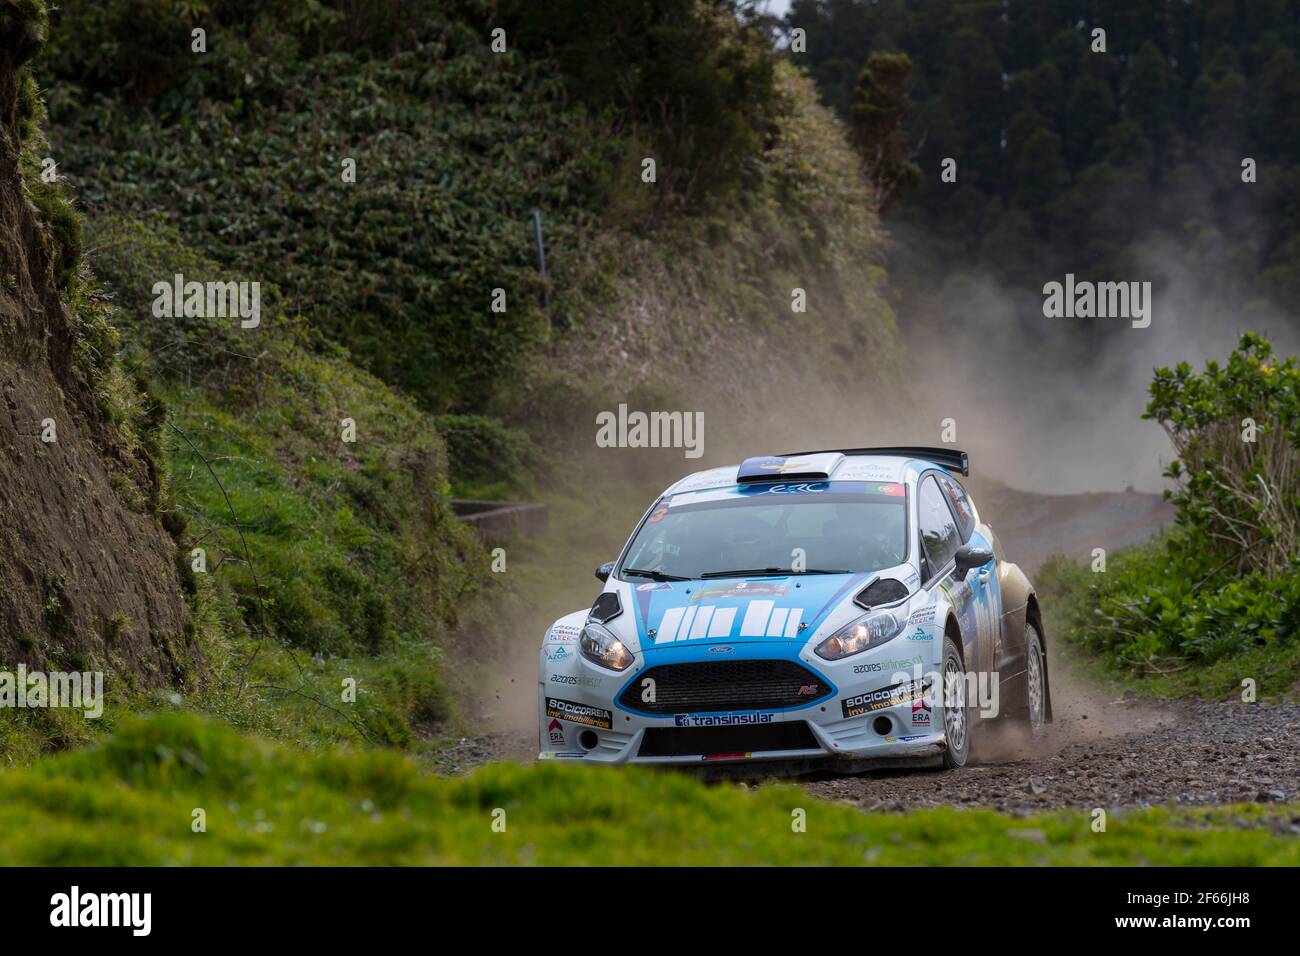 03 MOURA Ricardo COSTA Antonio Ford Fiesta R5 Action during the 2017 European Rally Championship ERC Azores rally, from March 30 to April 1, at Ponta Delgada Portugal - Photo Gregory Lenormand / DPPI Stock Photo